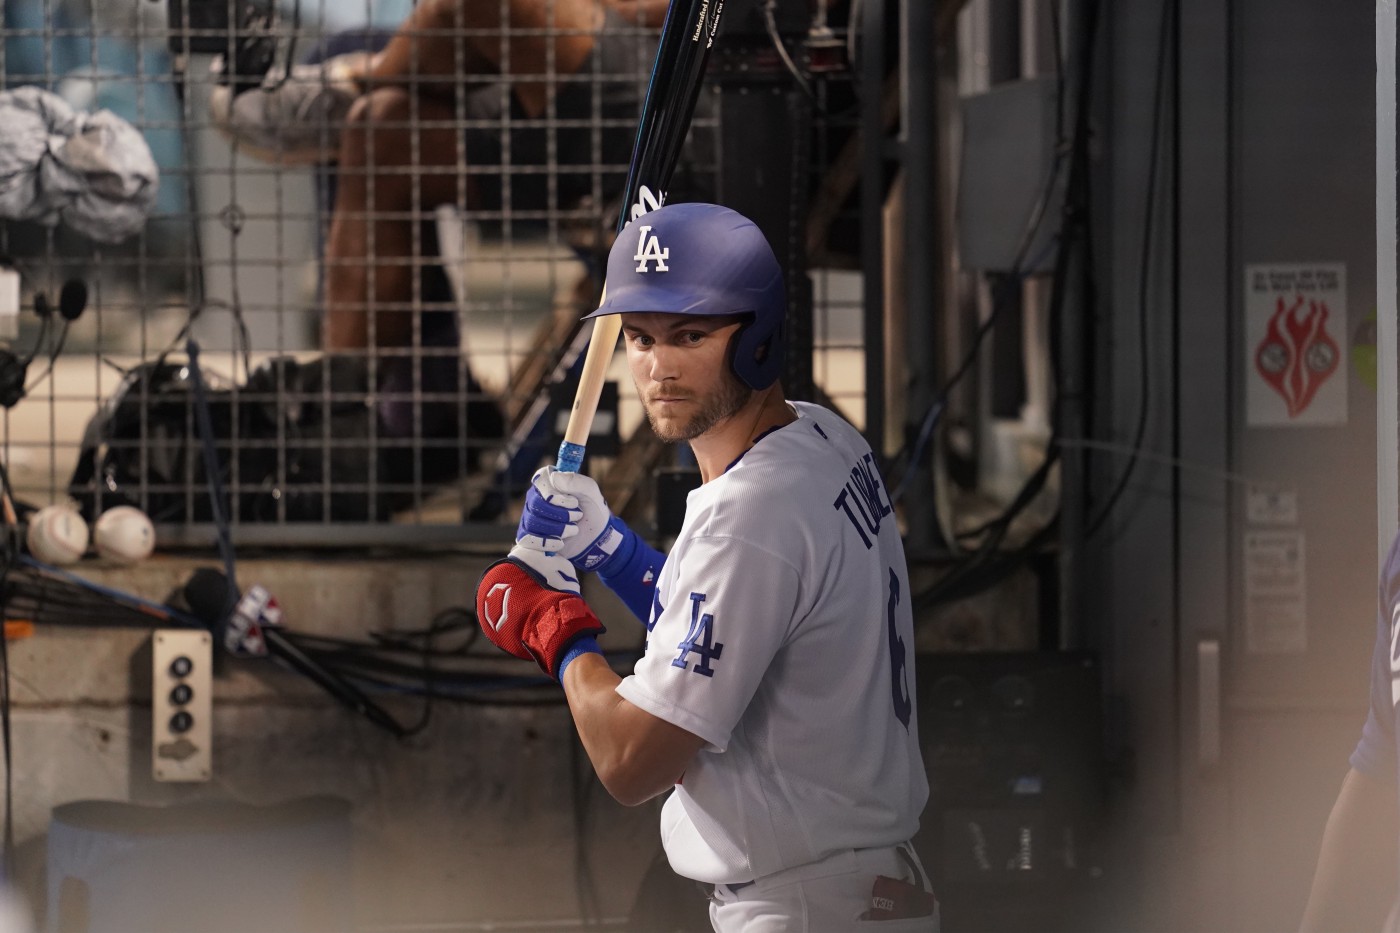 After a crazy week, Trea Turner finally settles into the Dodger lineup.